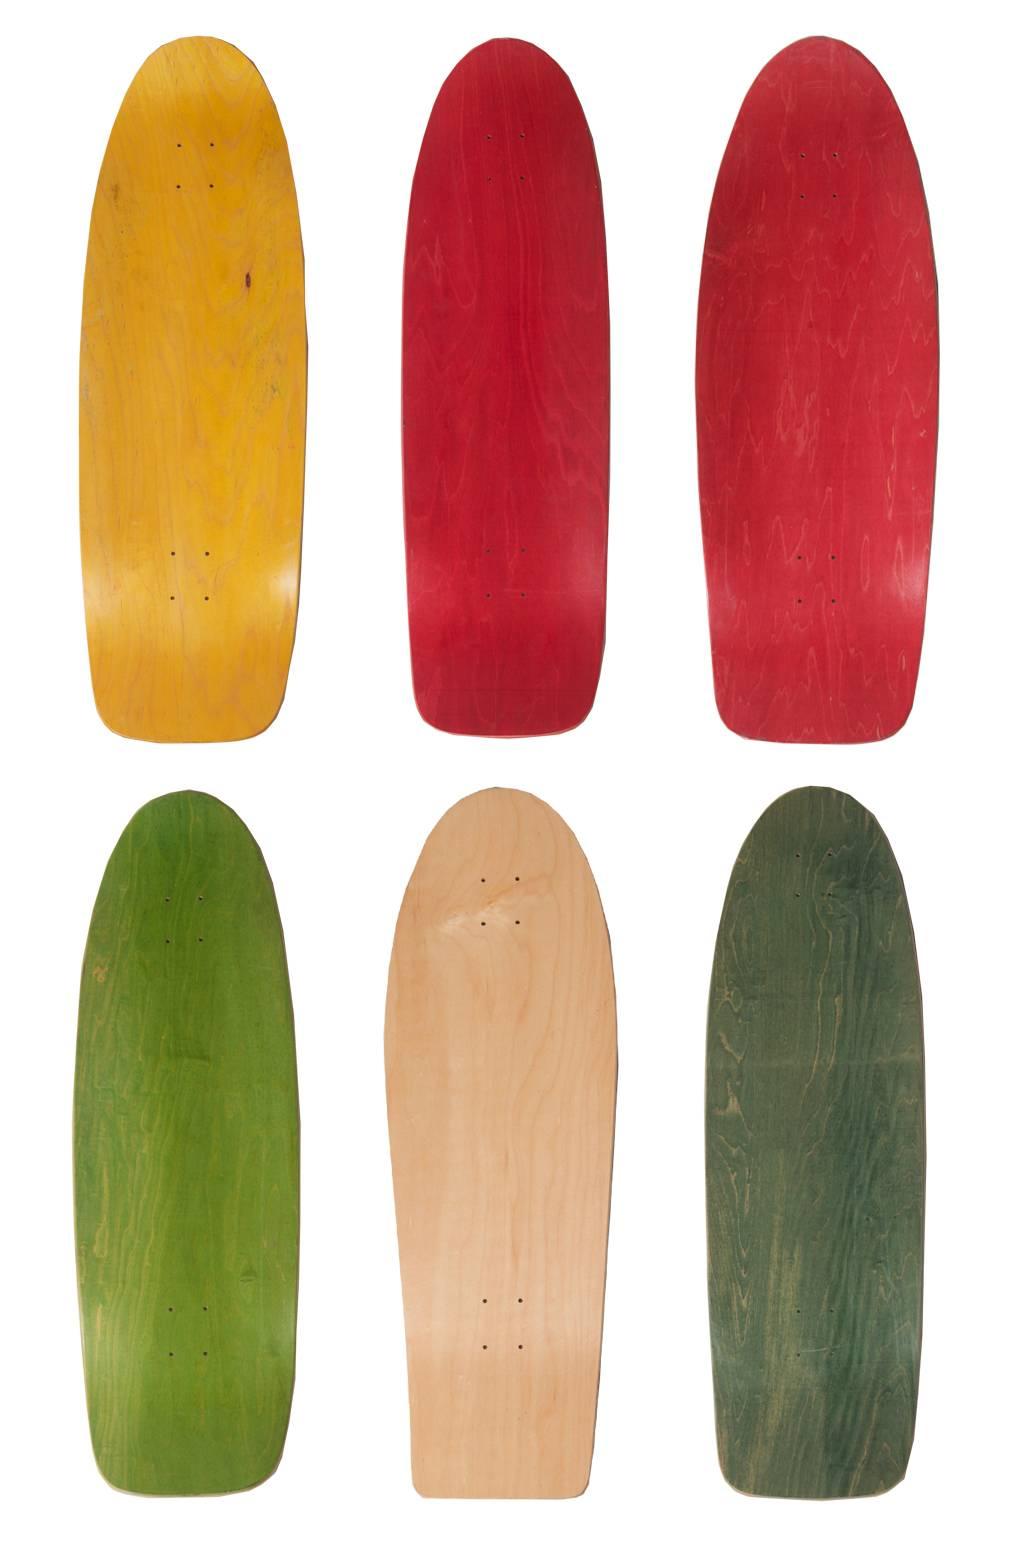 Unused, collectible and colorful Dogtown bulldog skateboard deck group by Wes Humpston are perfect for a wall installation for the Venice Beach skateboard enthusiast, or put wheels and trucks on them and go for a spin on ridable art! Venice Beach